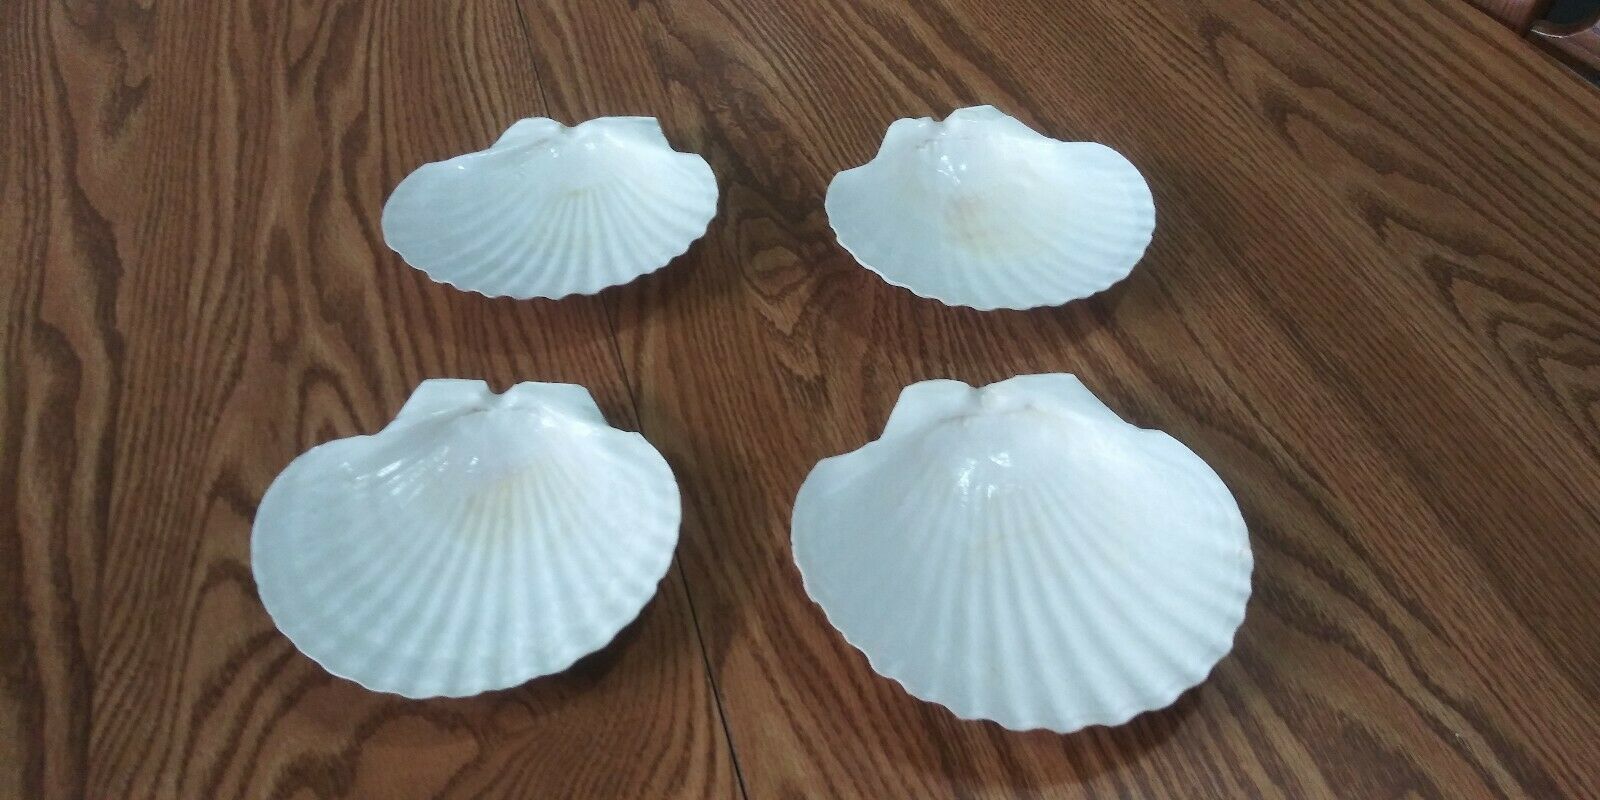 4 Natural Lions Paw Scallop Clam Shell Seashell Baking Soap Dish Candles